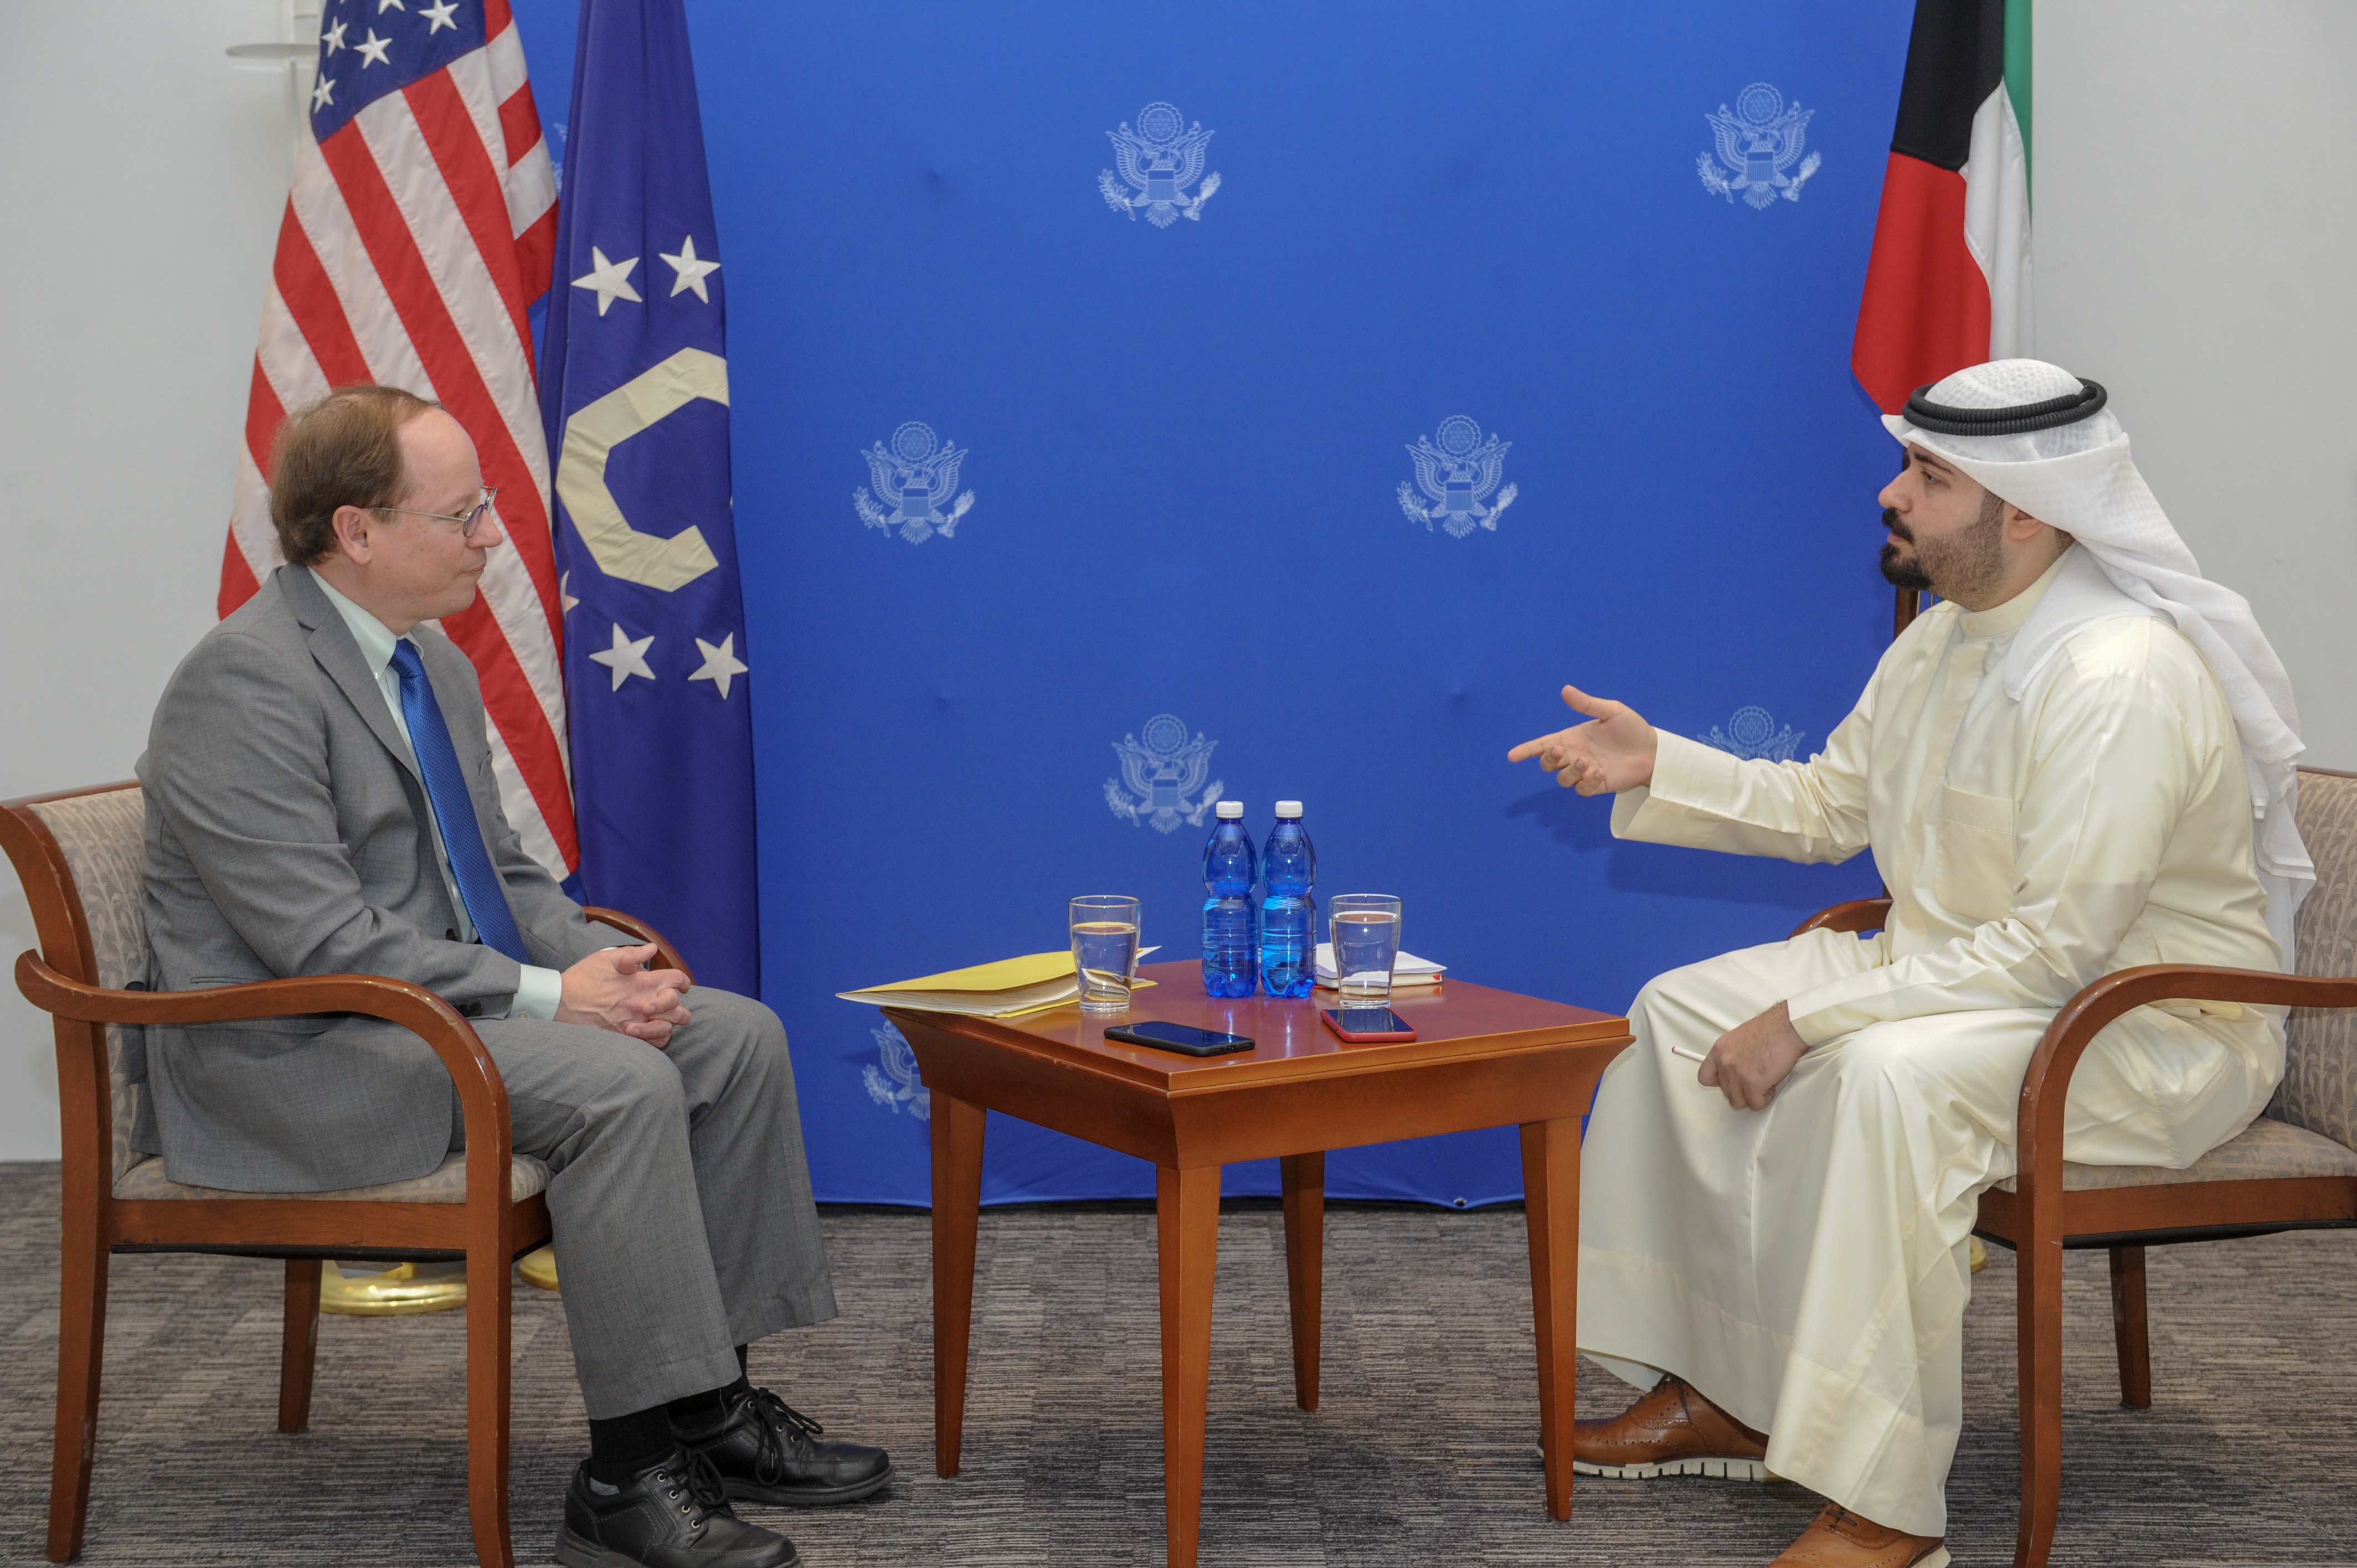 US Deputy Assistant Secretary for Visa Services, Edward J. Ramotowski During an interview with KUNA